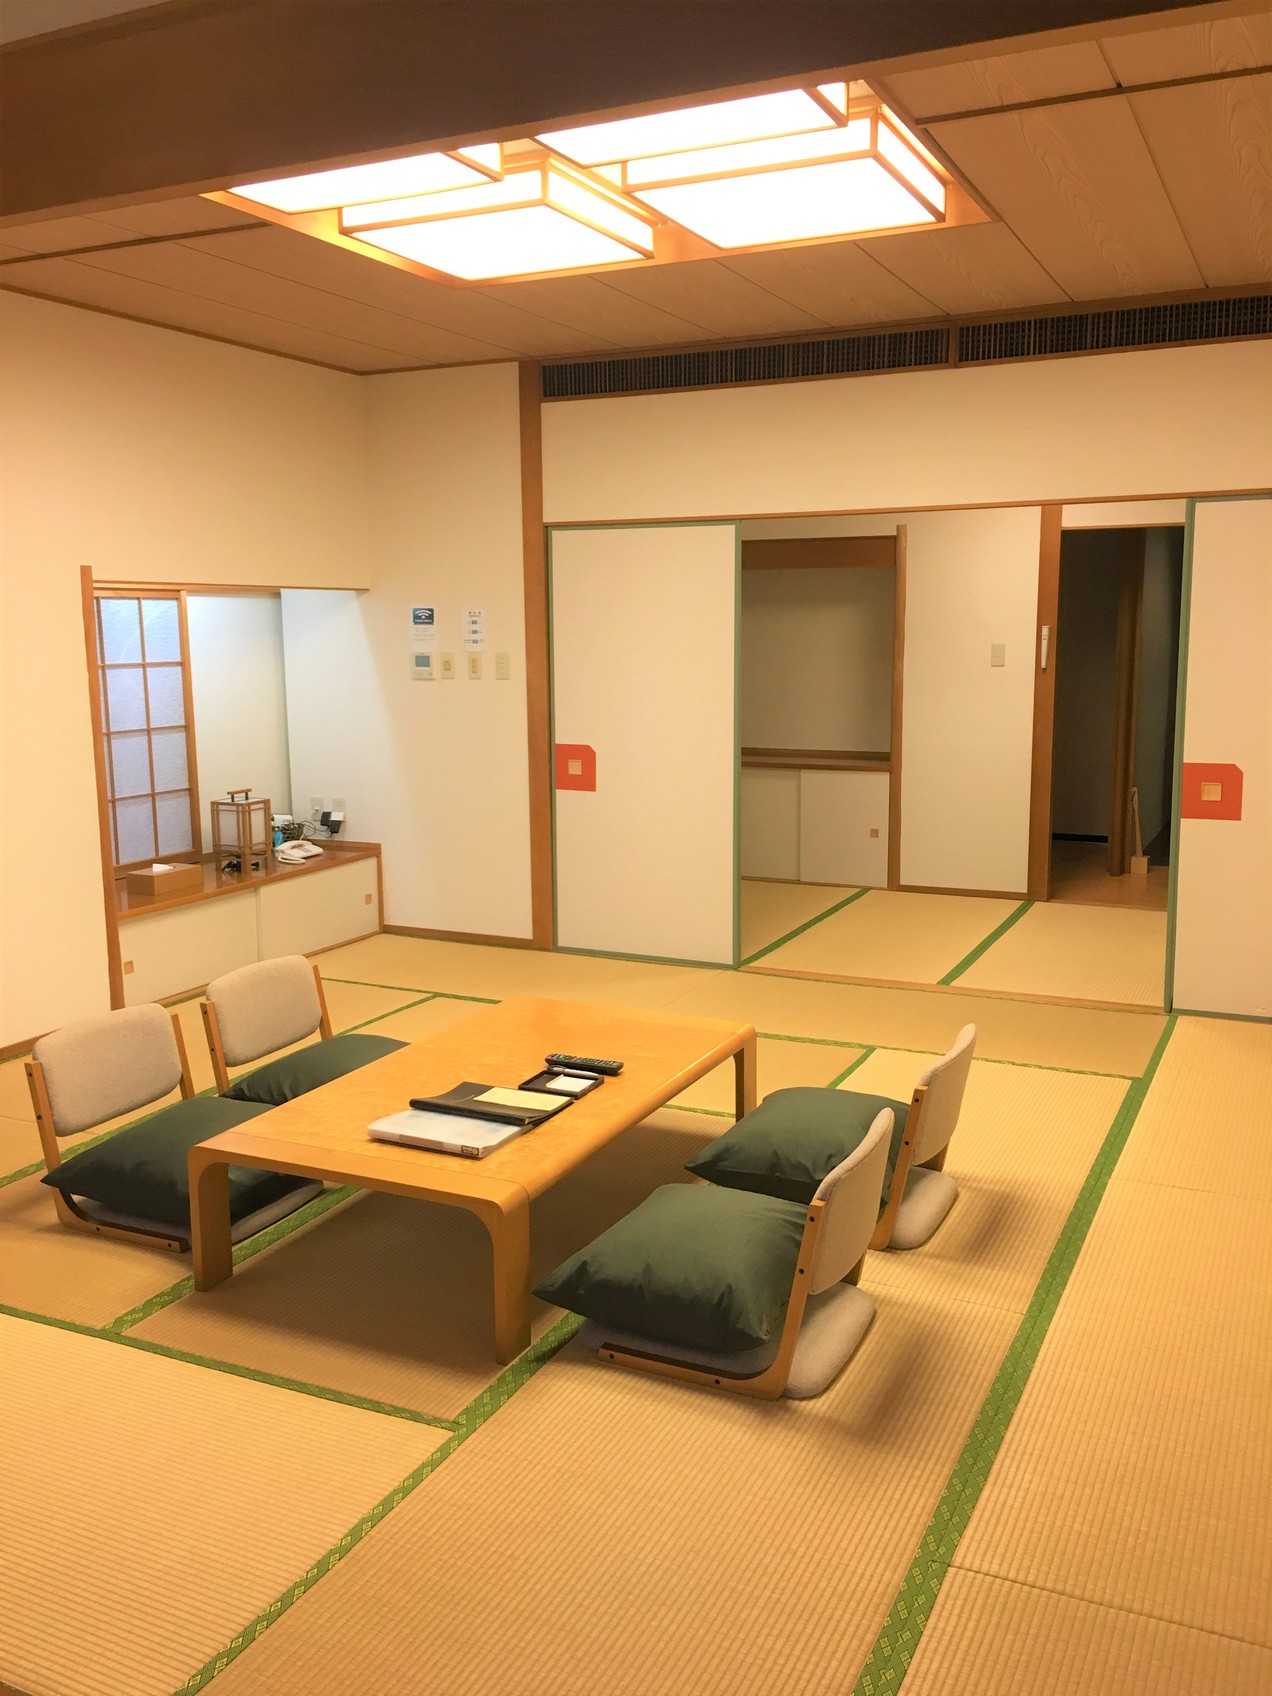 Izu Kogen Hotel Itsutsuboshi The 3-star Izu Kogen Hotel Itsutsuboshi offers comfort and convenience whether youre on business or holiday in Atami. The property offers a high standard of service and amenities to suit the individu